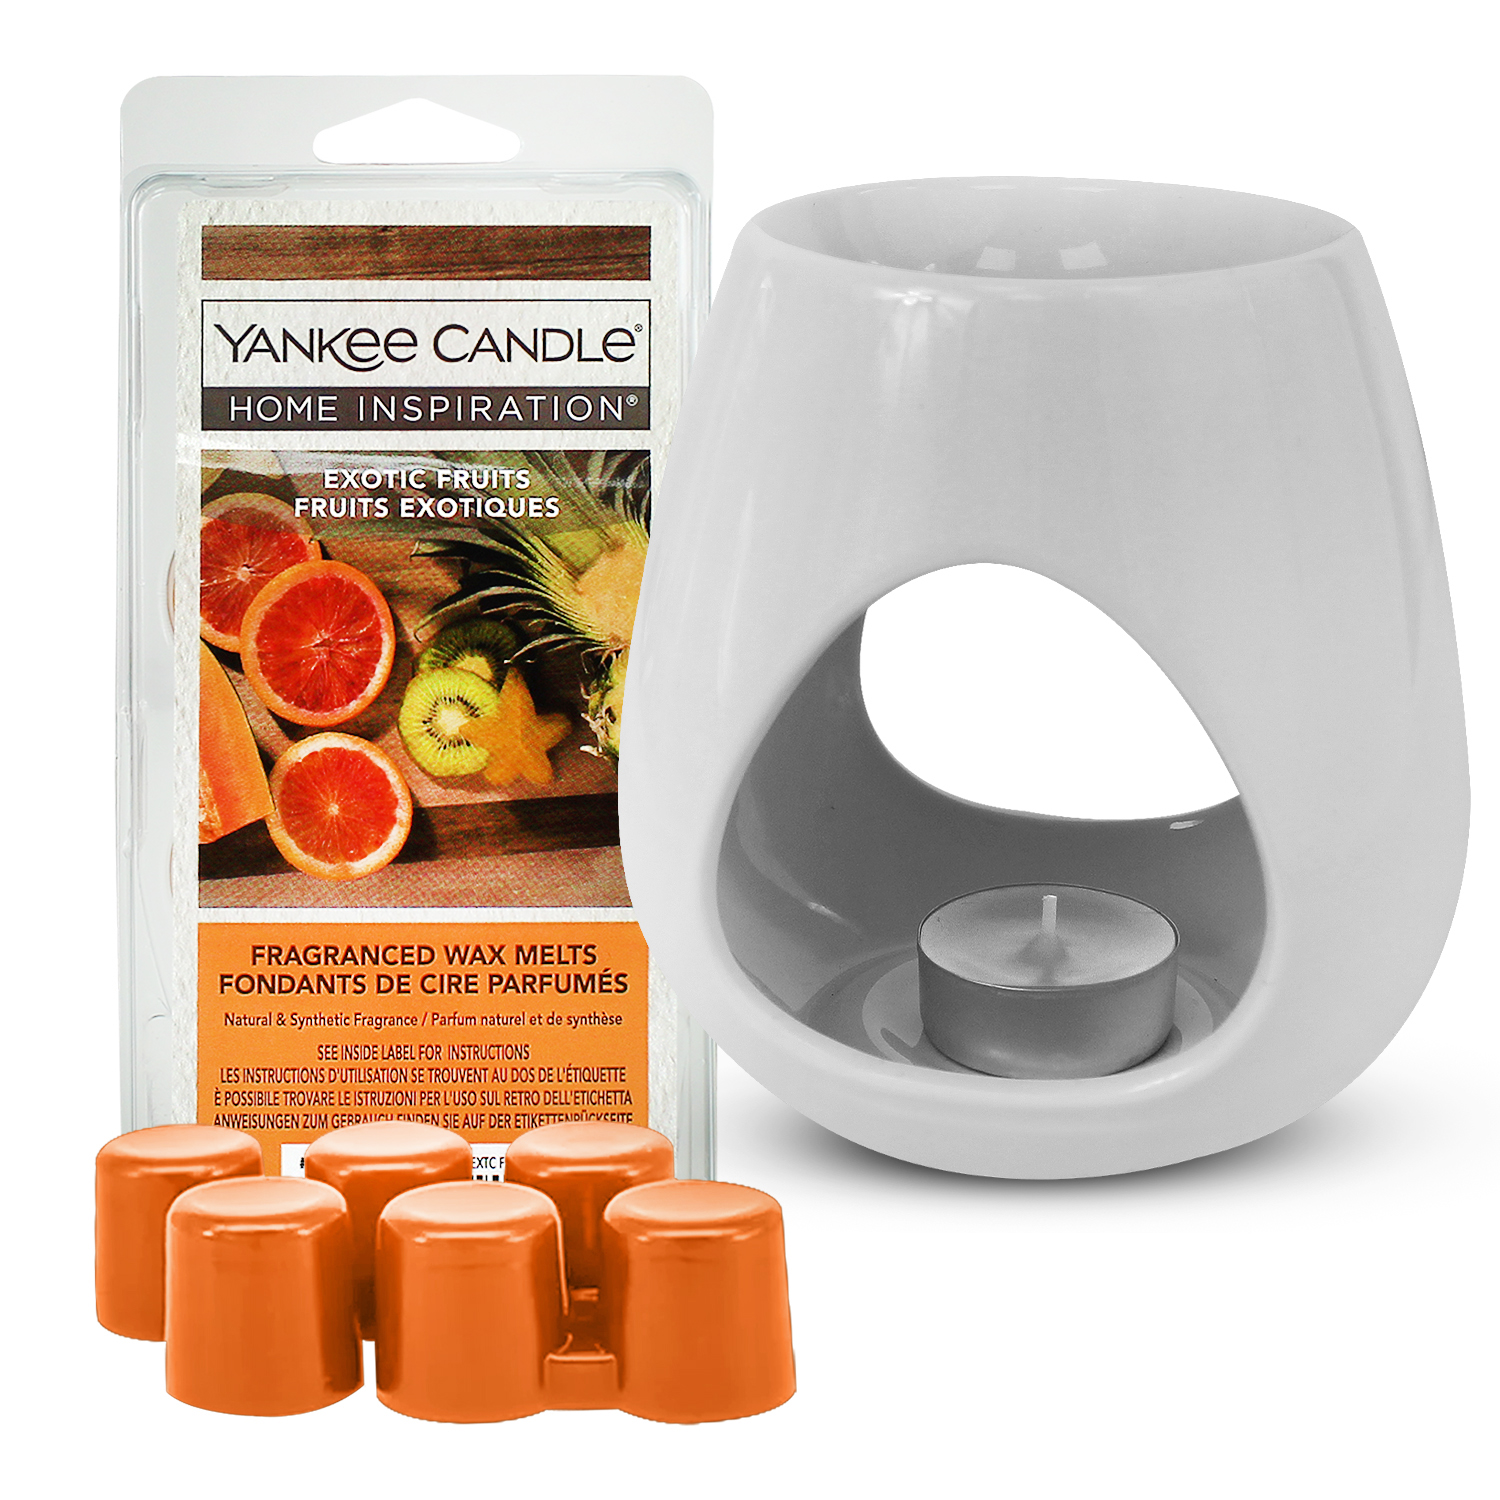 Yankee Candle Home Inspiration Wax Melt Ceramic Warmer Kit - Exotic Fruits  - WeeklyDeals4Less